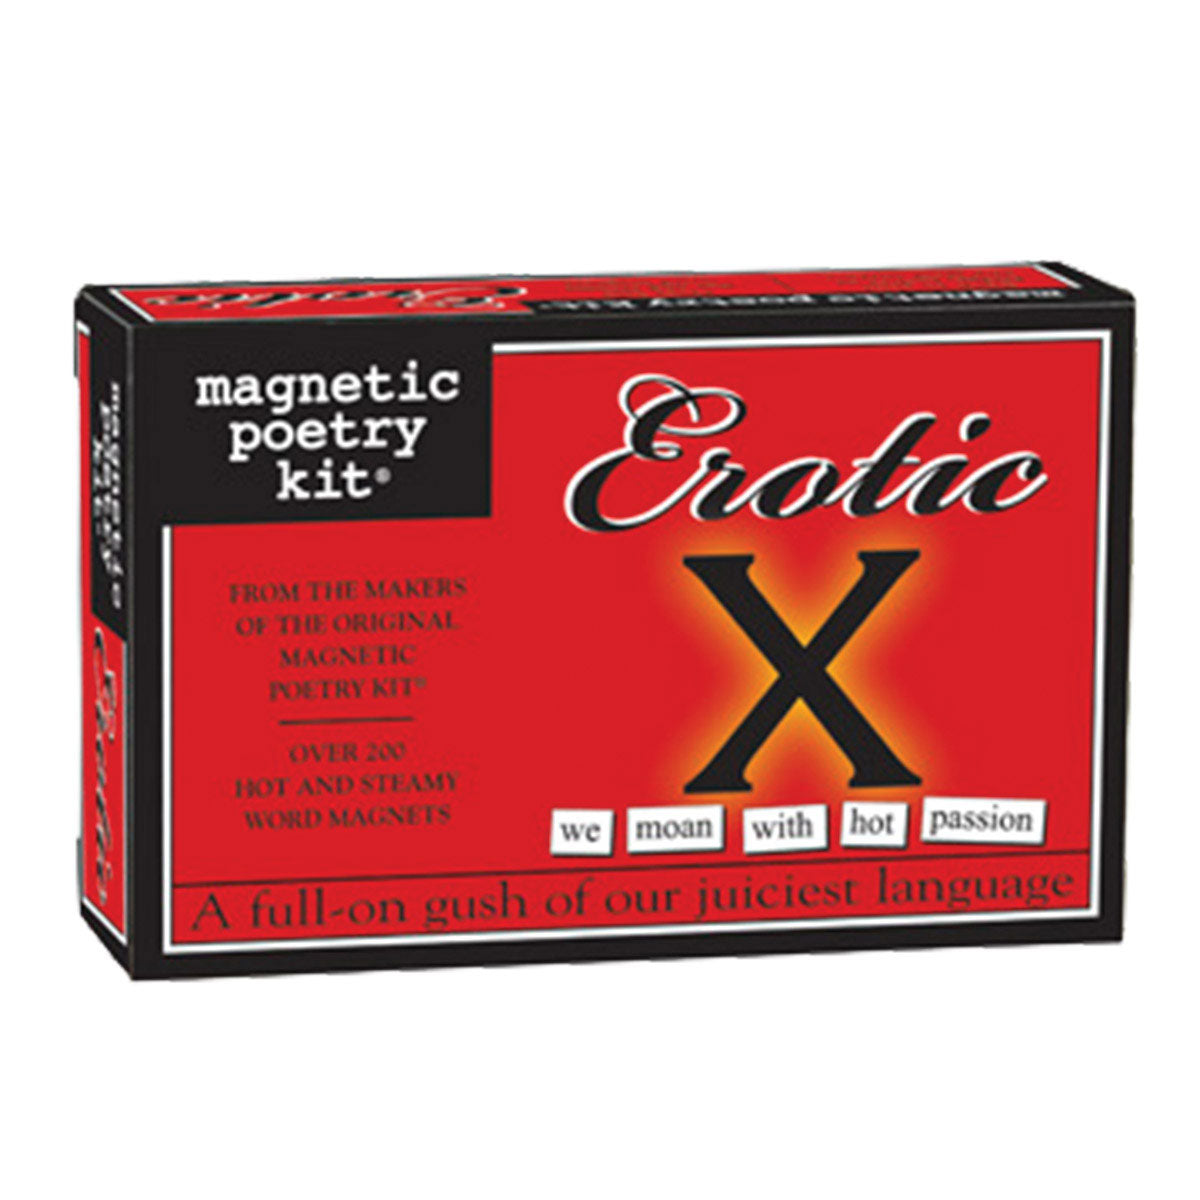 Magnetic Poetry Kit: Erotic X Edition